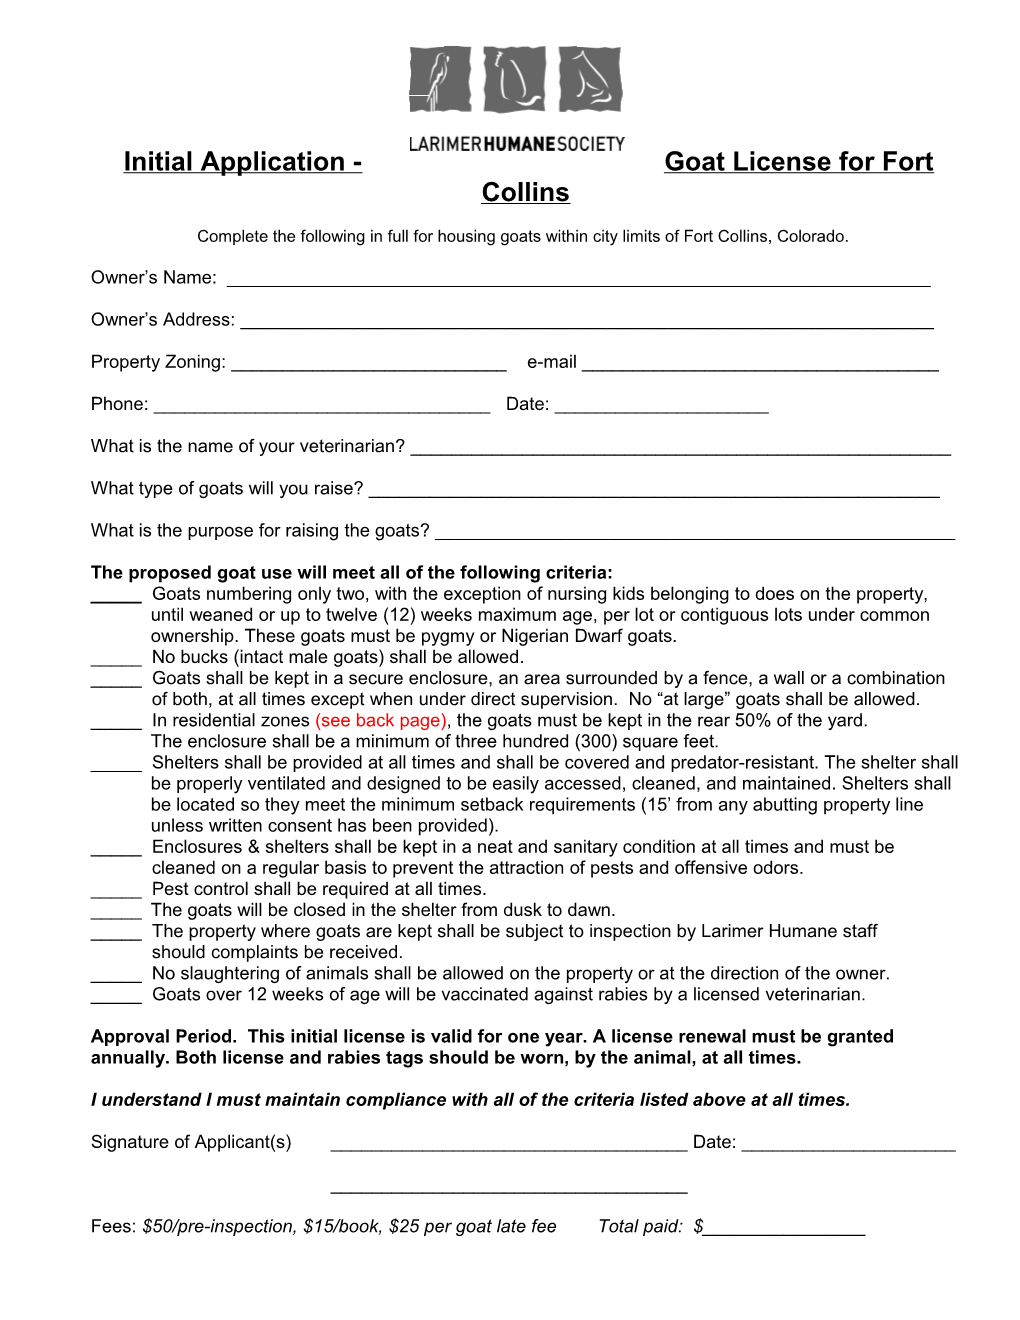 Initial Application - Goat License for Fort Collins